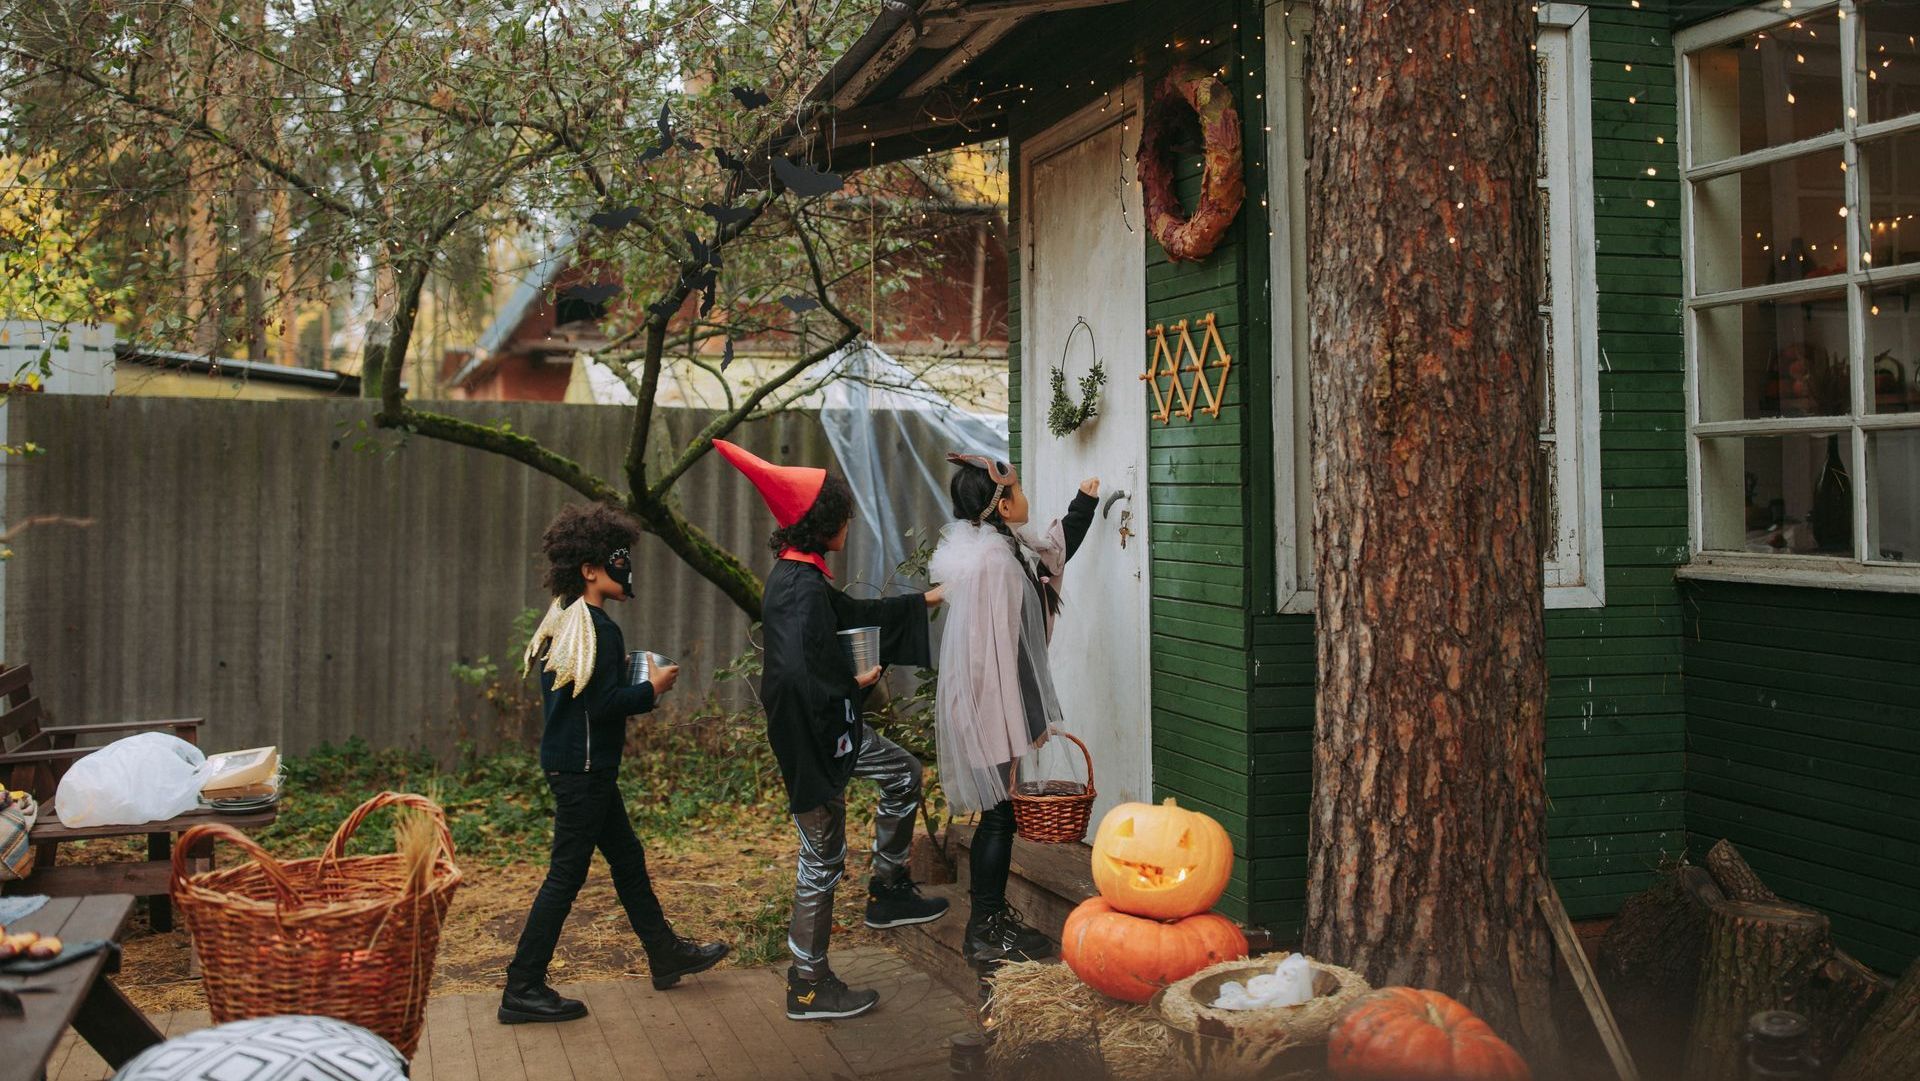 Three trick or treaters approach a door.